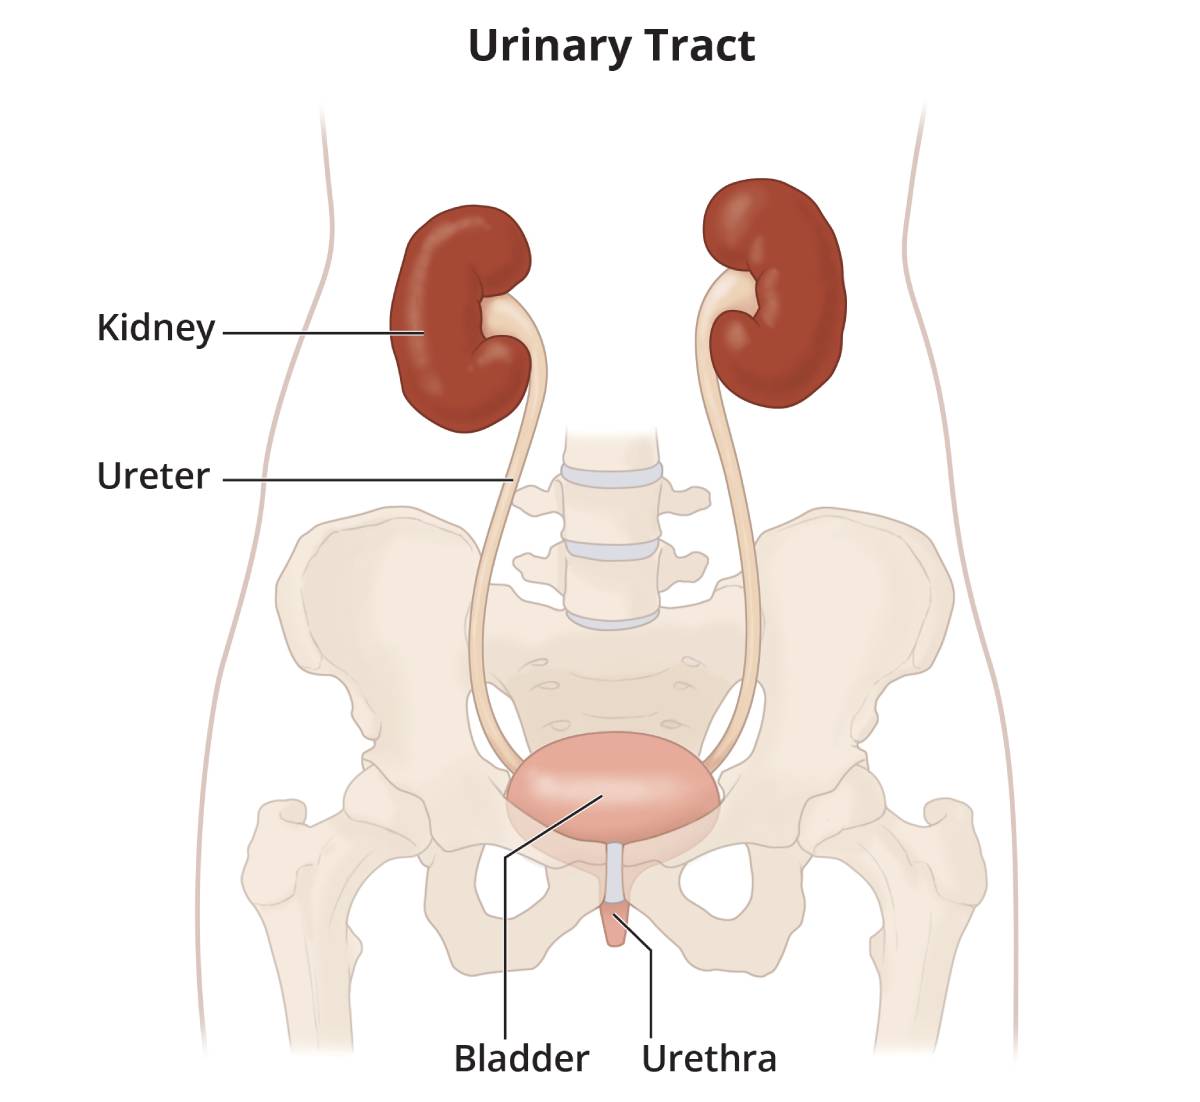 Urinary tract, including the kidneys, ureters, bladder, and urethra.